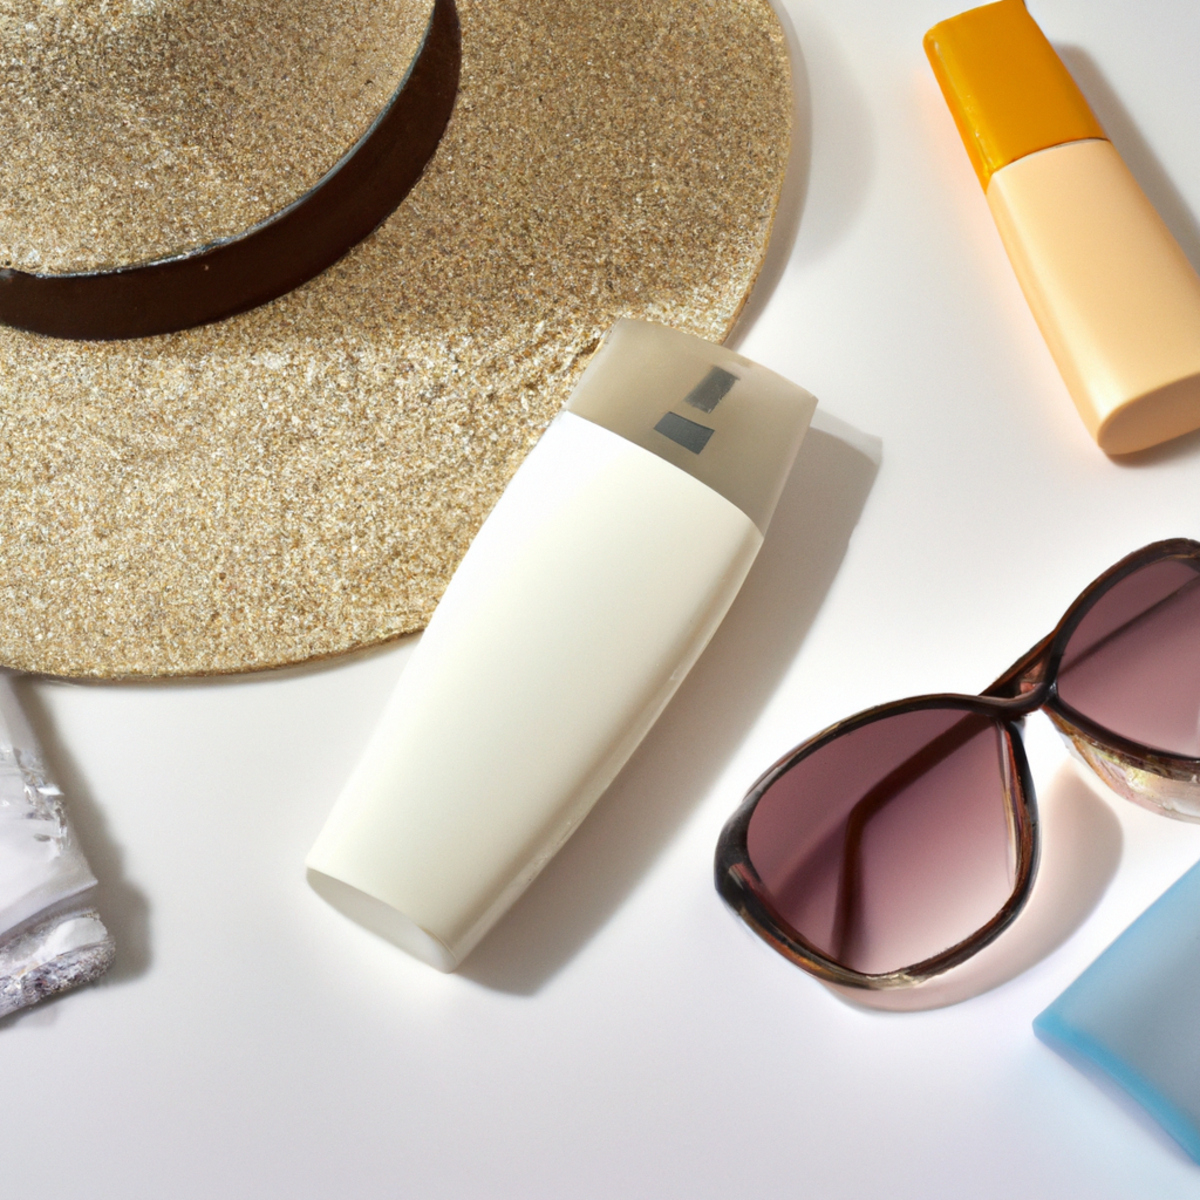 Sun protection and SPF products - Ready to soak up the sun with your natural skin care routines? Don't forget your trusty sunscreen, stylish hat, and beach essentials for a day of fun in the sun!